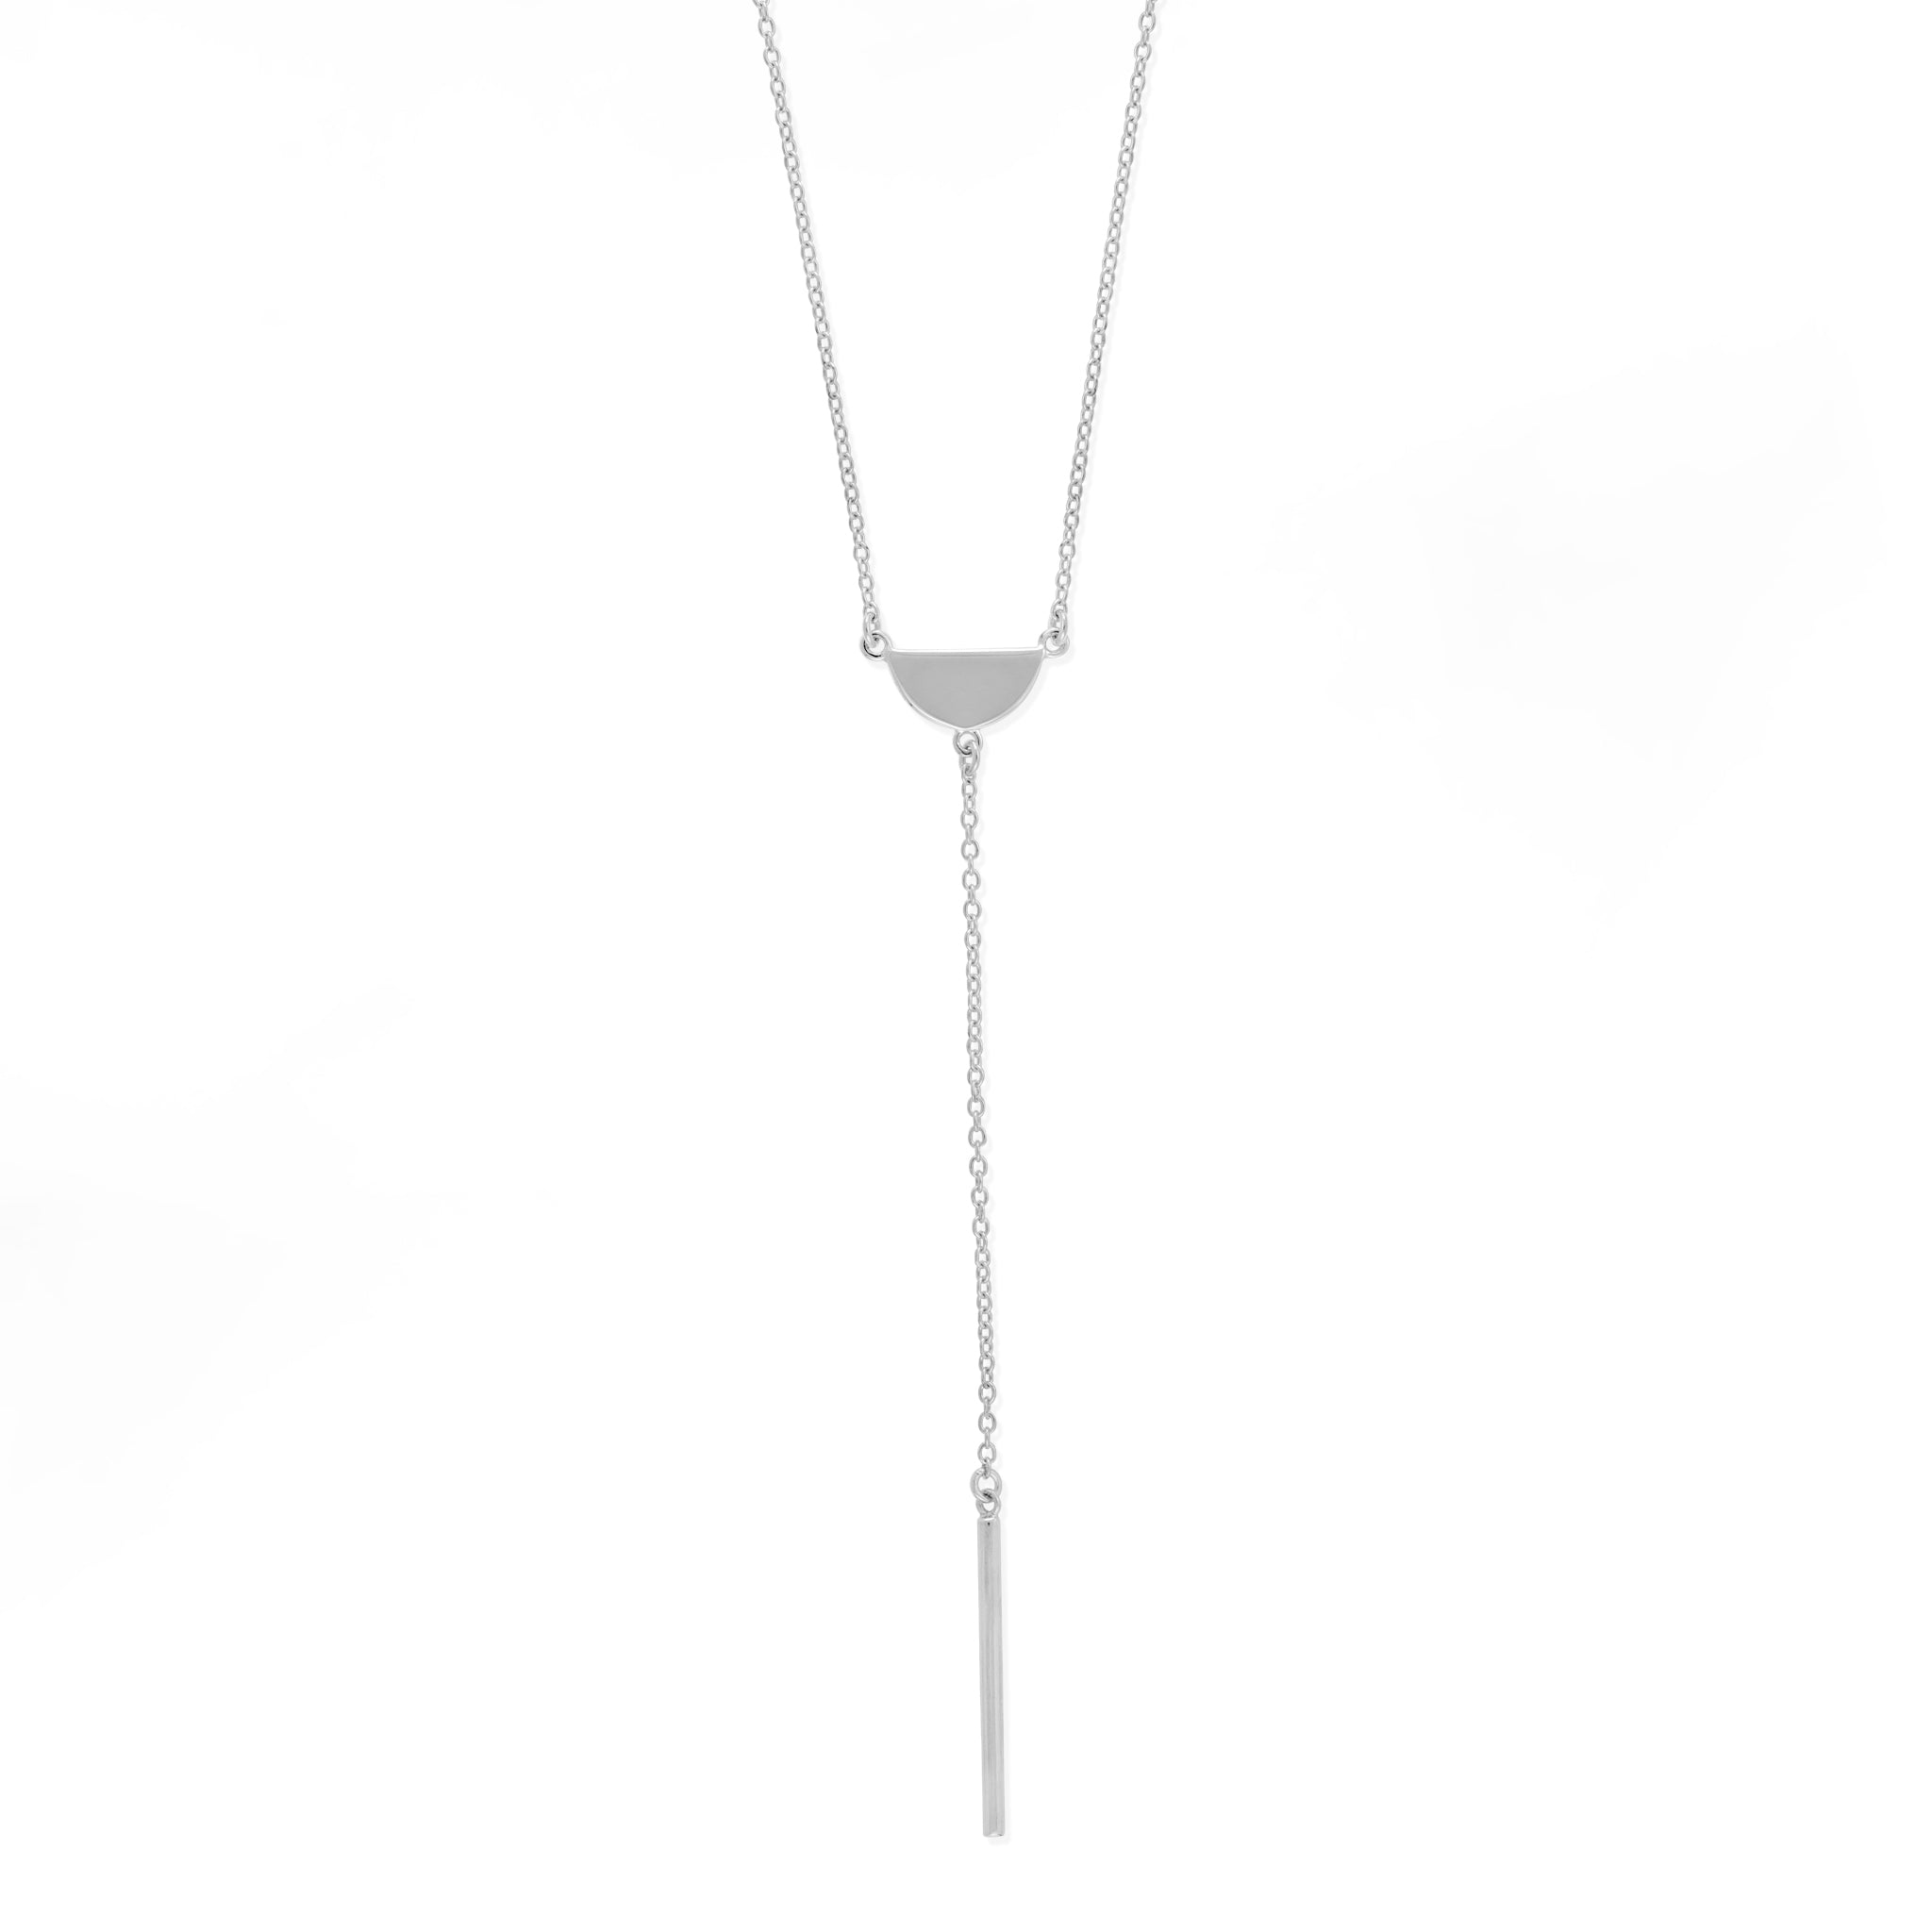 Boma Jewelry Necklaces Sterling Silver Lariat Necklace